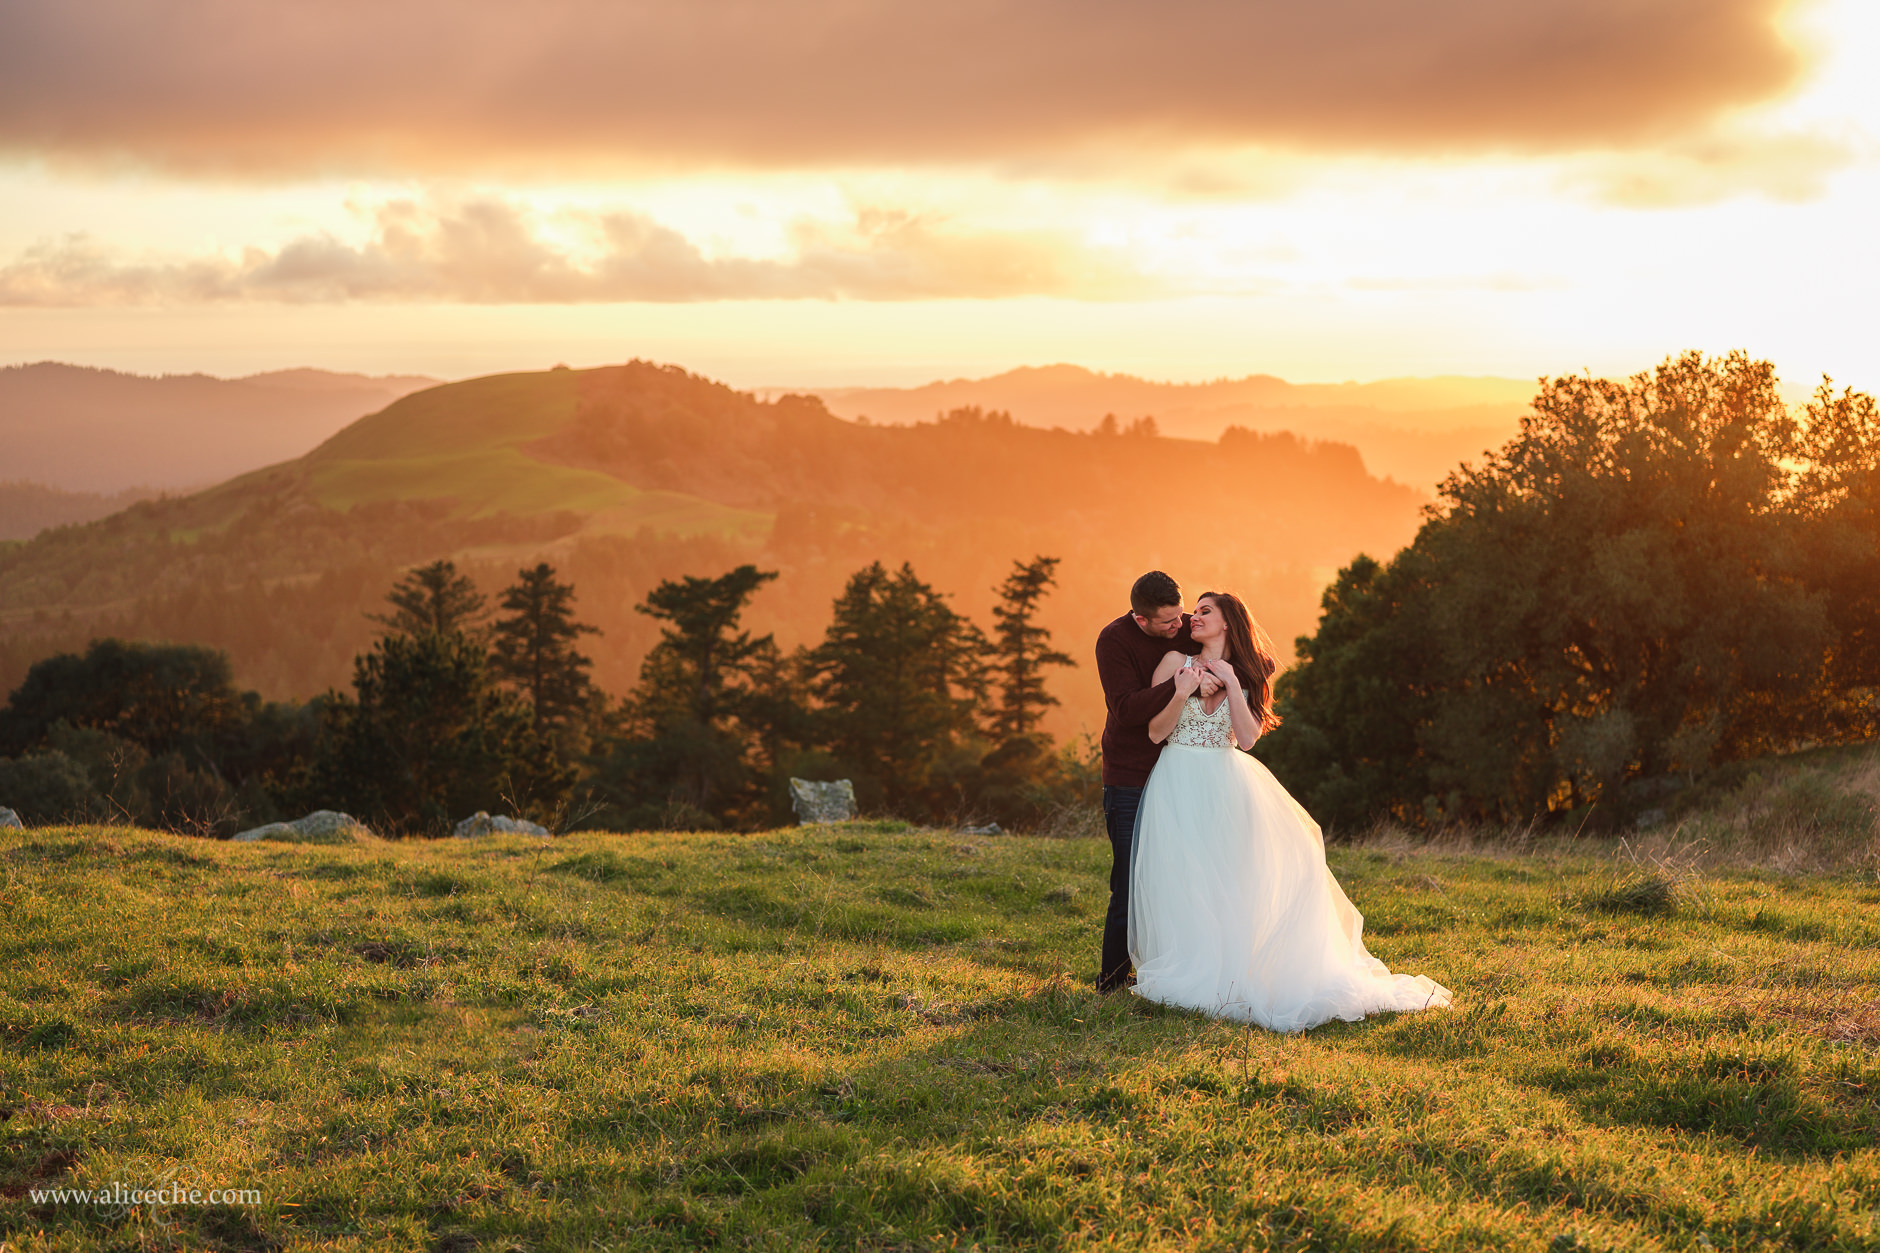 Northern California Elopement Bride and Groom in Hills at Sunset